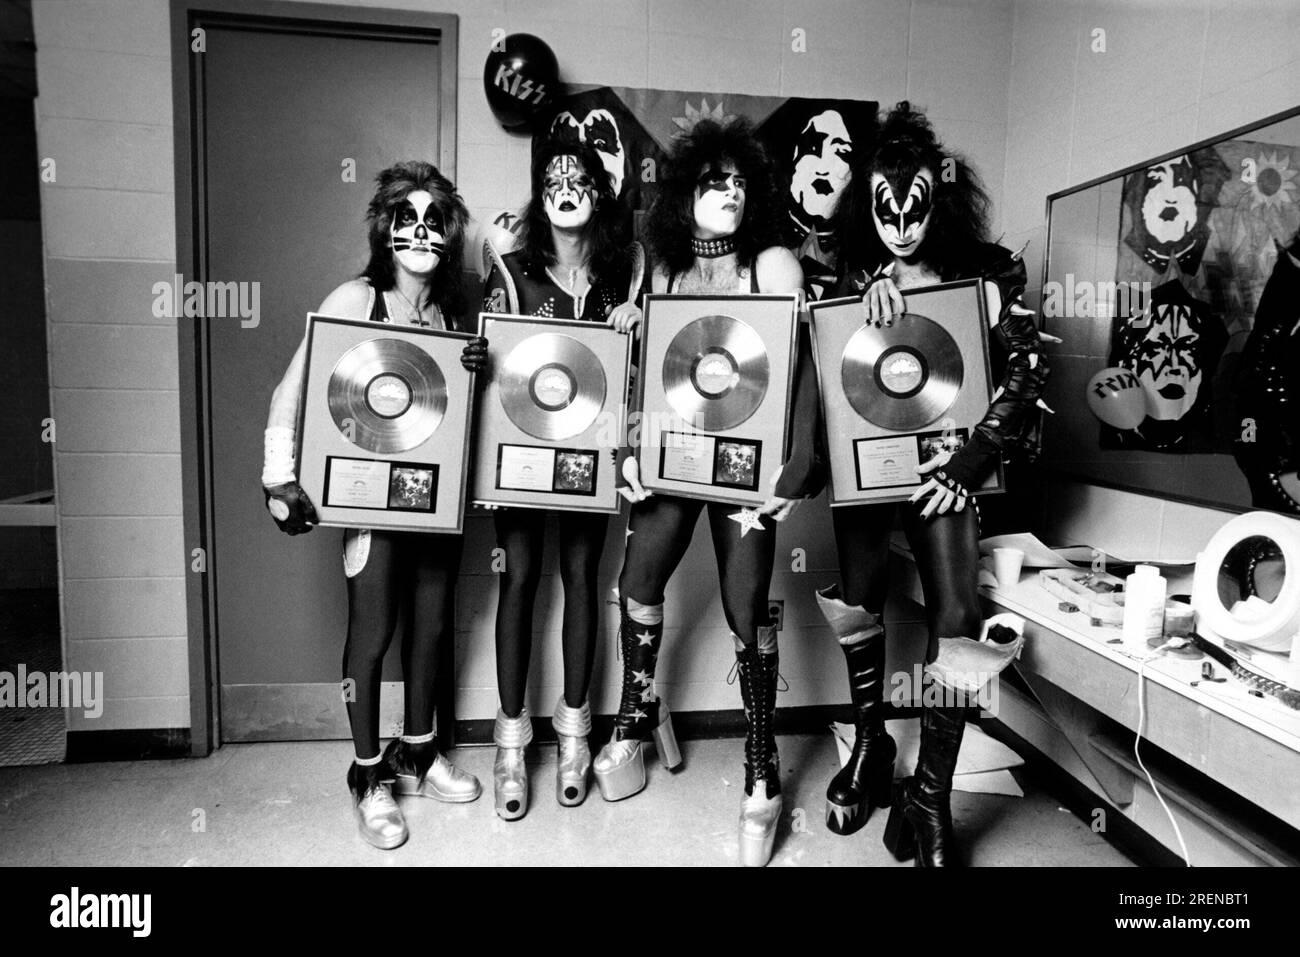 PAUL STANLEY, KISS, GENE SIMMONS, ACE FREHLEY and PETER CRISS in BIOGRAPHY: KISSTORY (2021), directed by D. J. VIOLA. Credit: A&E Television Networks / Album Stock Photo